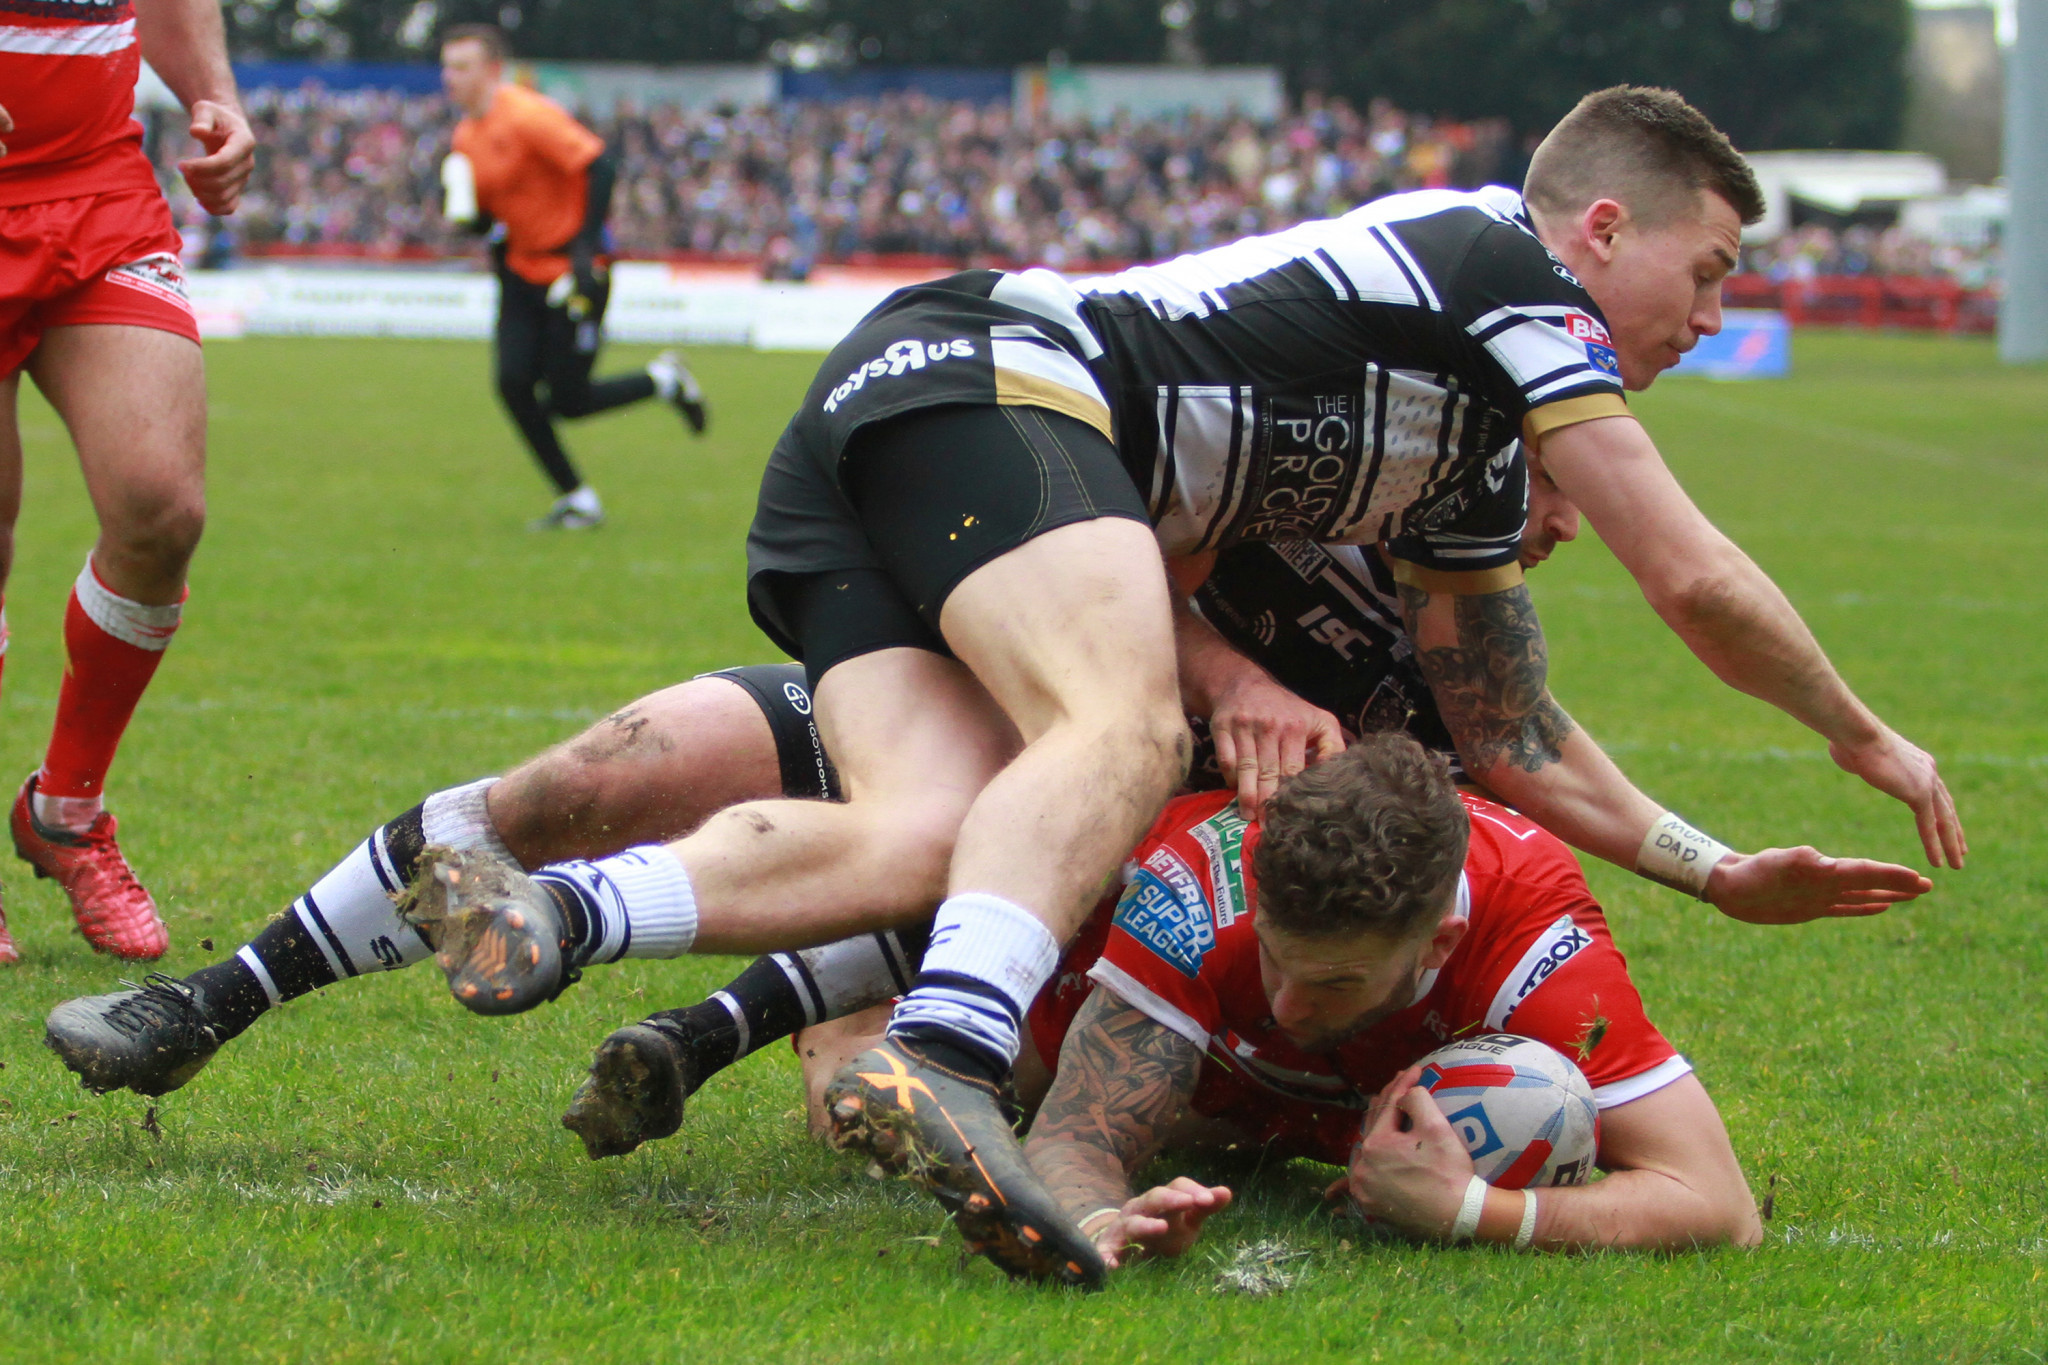 Thomas Minns scoring a try for Hull Kingston Rovers RFC, the team he was playing for when he tested positive for the prohibited substance benzoylecgonine in March 2018 ©Getty Images 